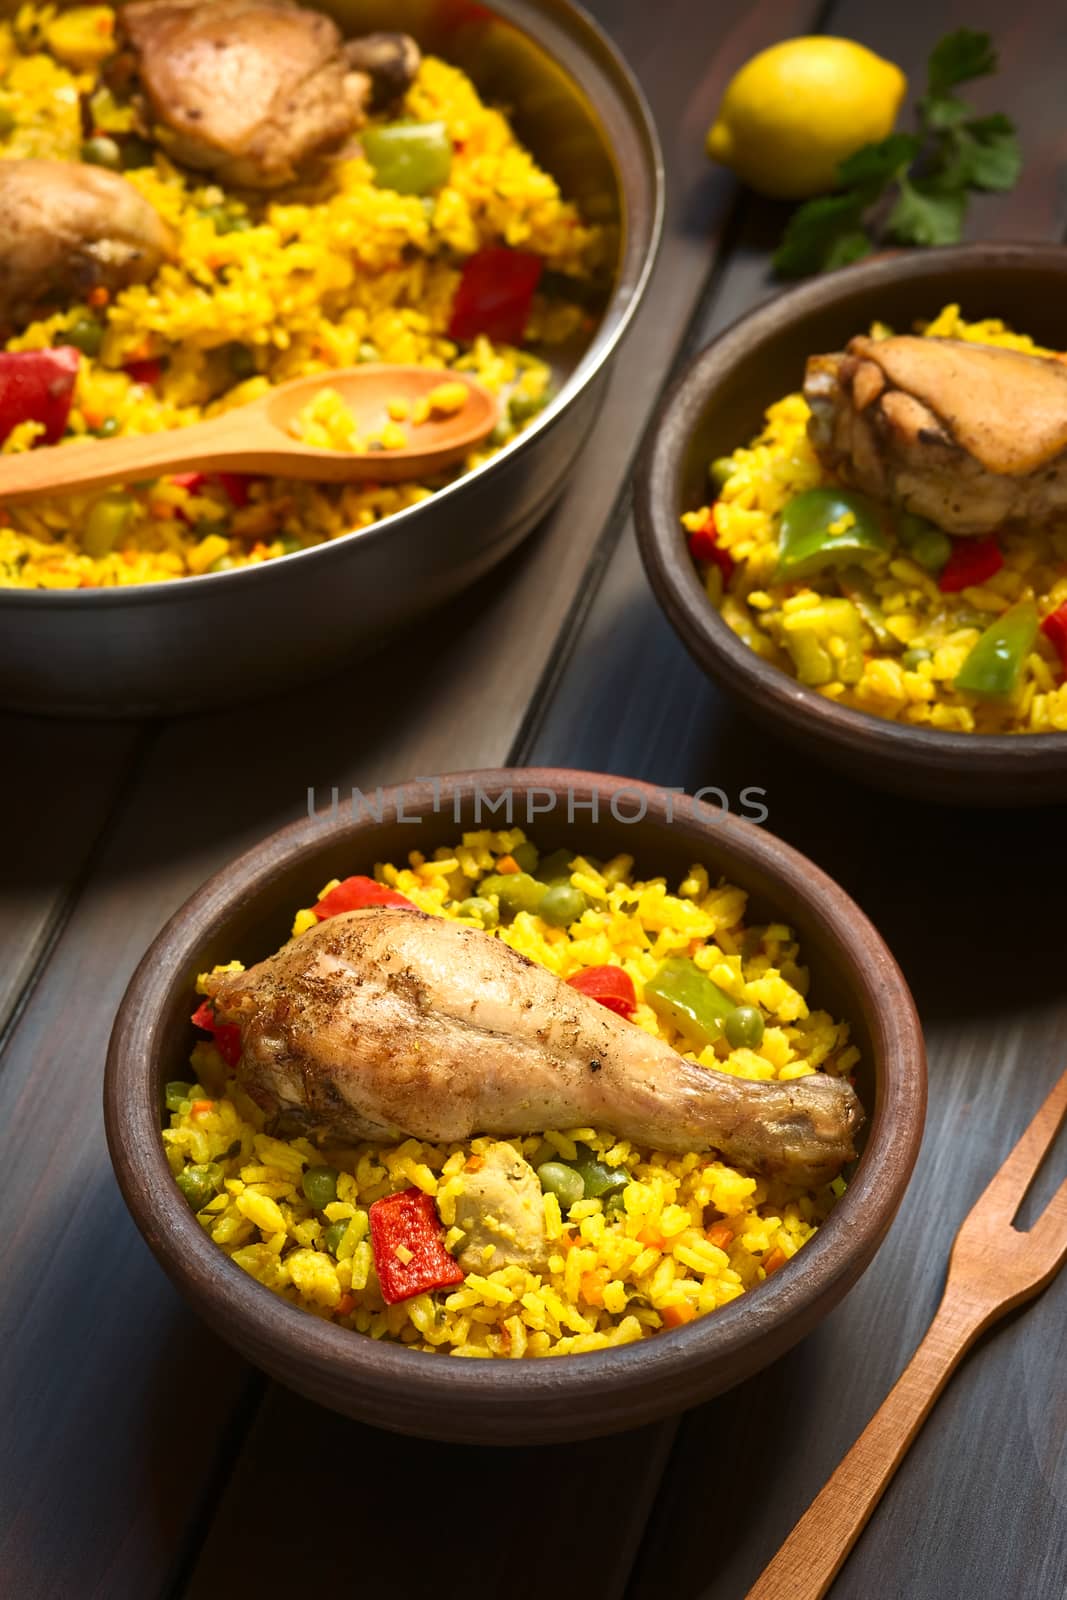 Two rustic bowls and a pot of chicken paella, a traditional Valencian (Spanish) rice dish made of rice, chicken, peas and capsicum , photographed on dark wood with natural light (Selective Focus, Focus on the chicken thigh)